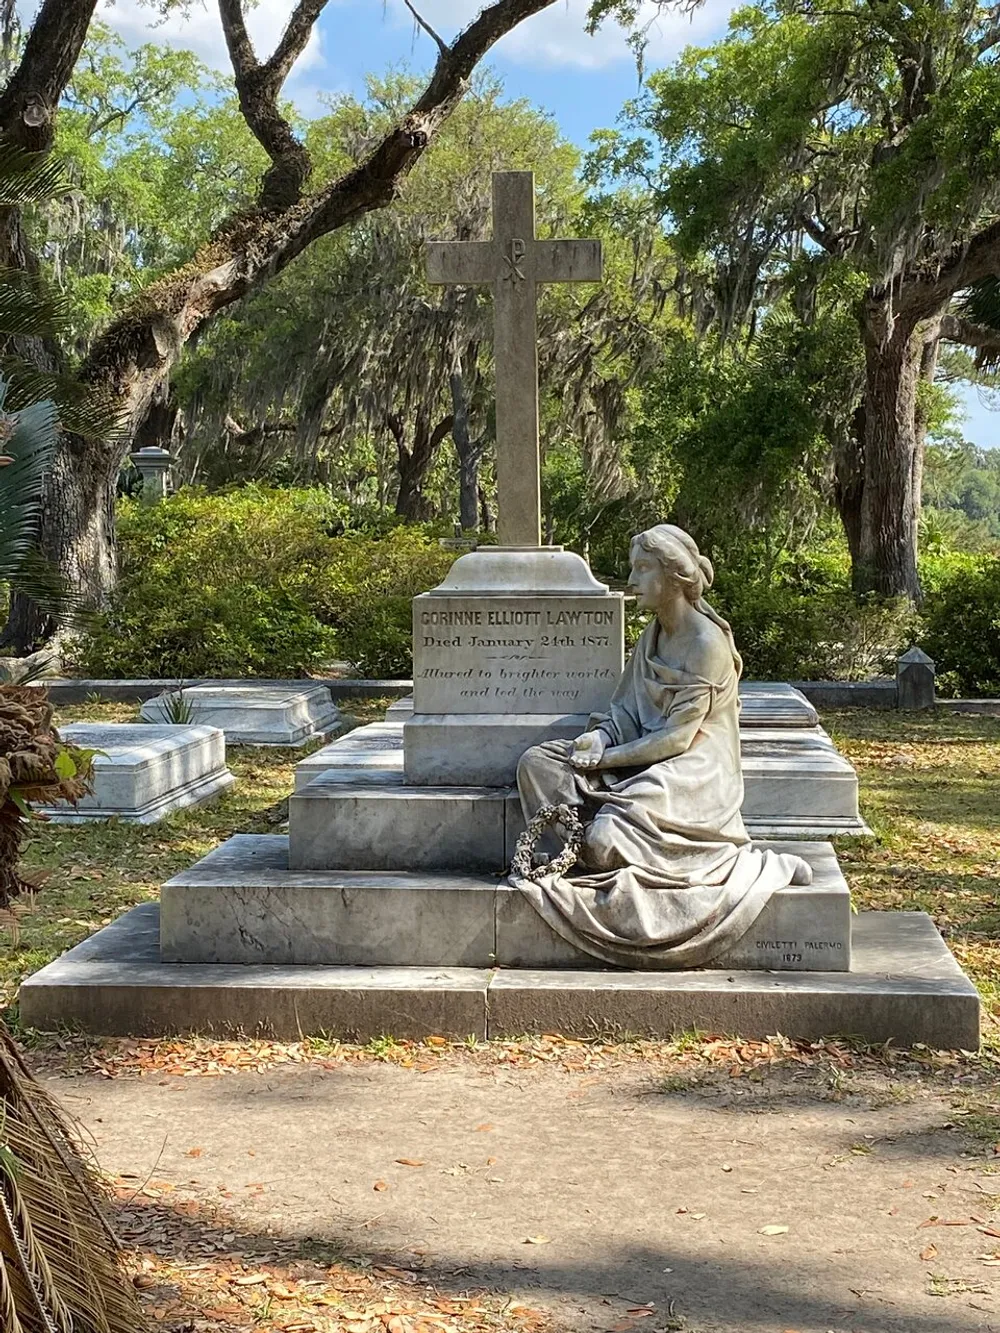 The image shows an elaborate grave with a seated statue of a woman looking contemplatively at a cross surrounded by trees draped with Spanish moss indicative of a serene Southern cemetery